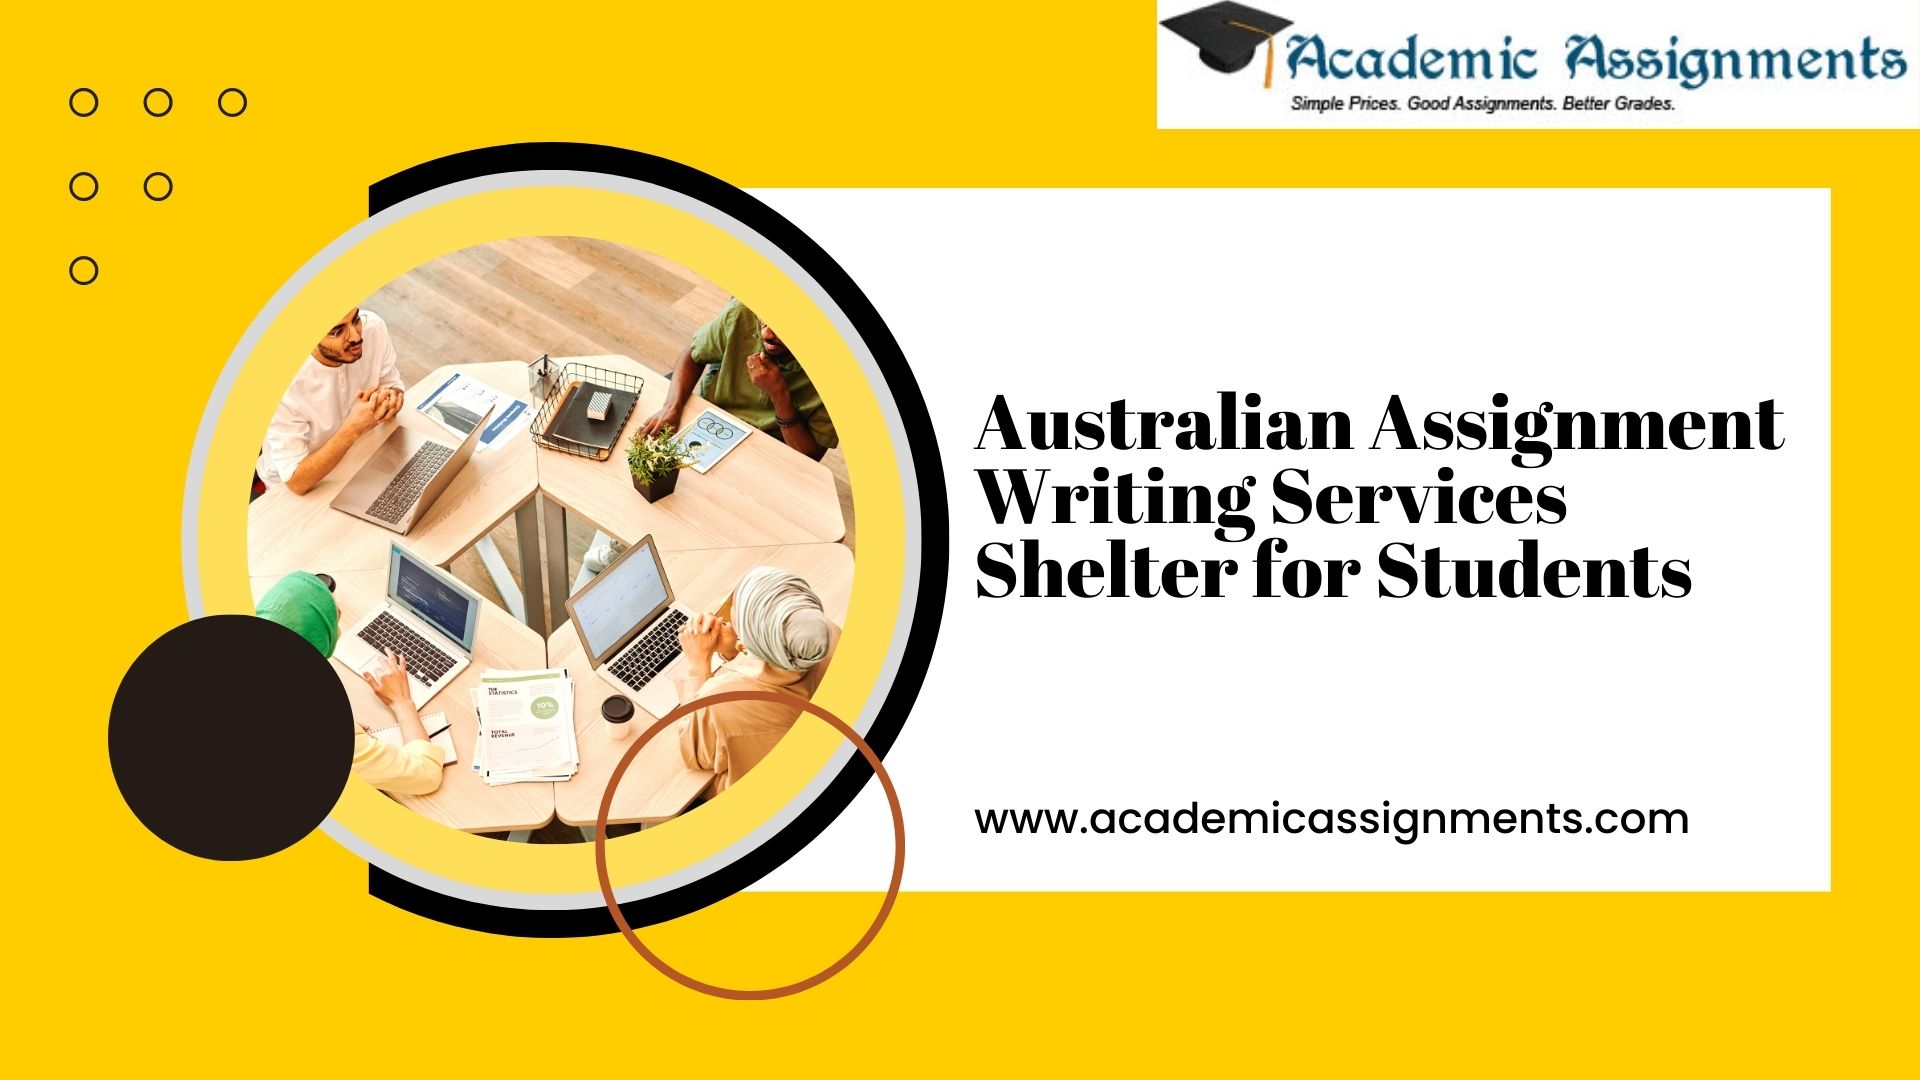 Australian Assignment Writing Services Shelter for Students